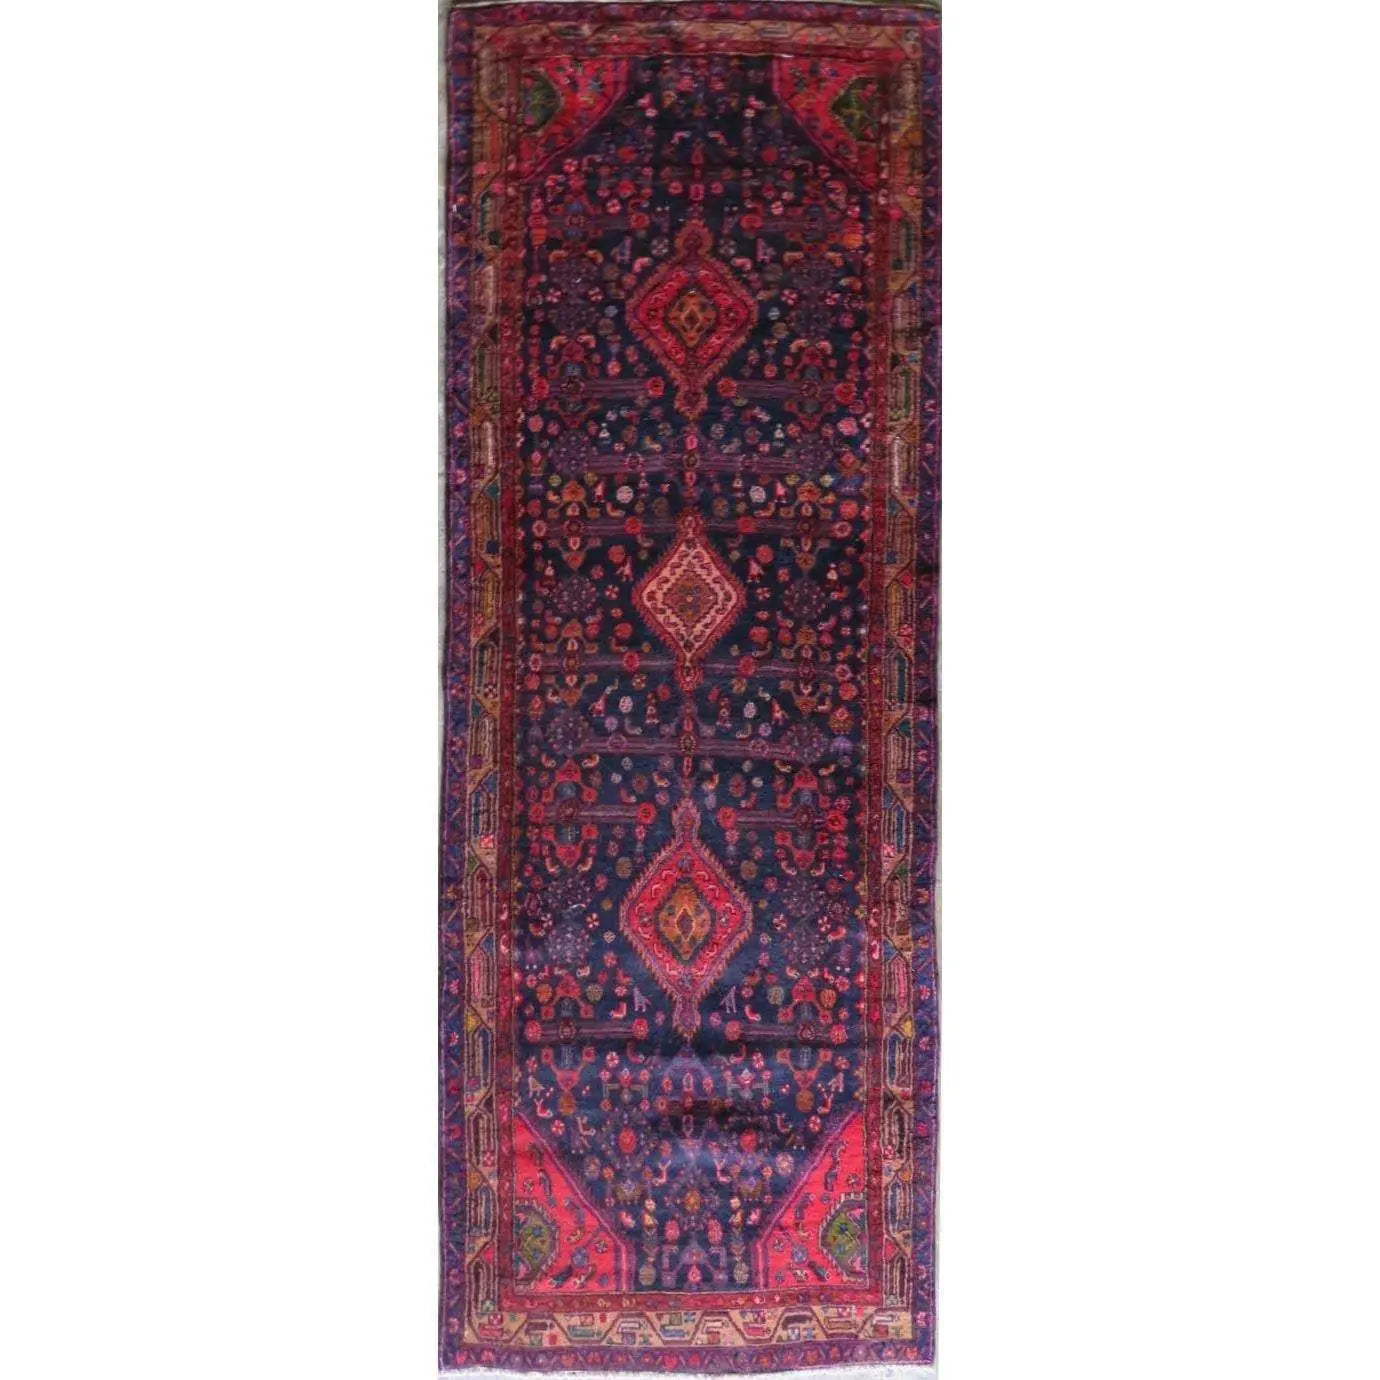 Hand-Knotted Vintage Rug 11'2" x 3'7"